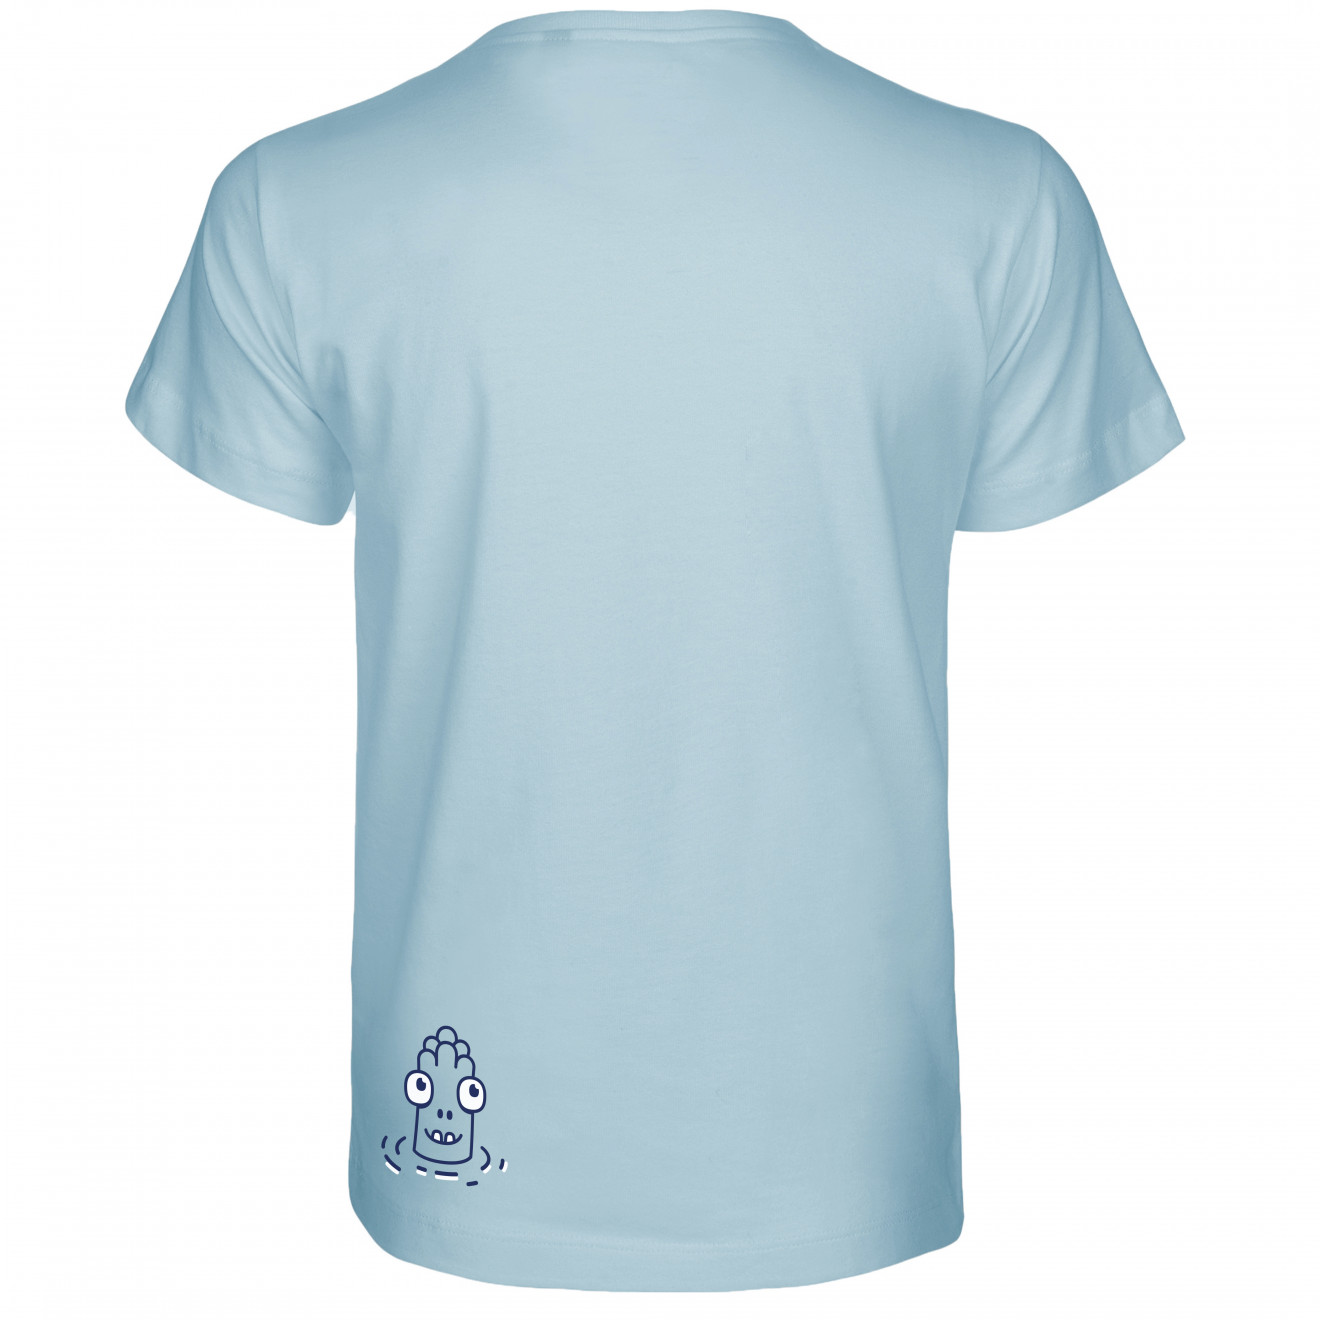 Image of the product Ocean, from the product category T-shirts